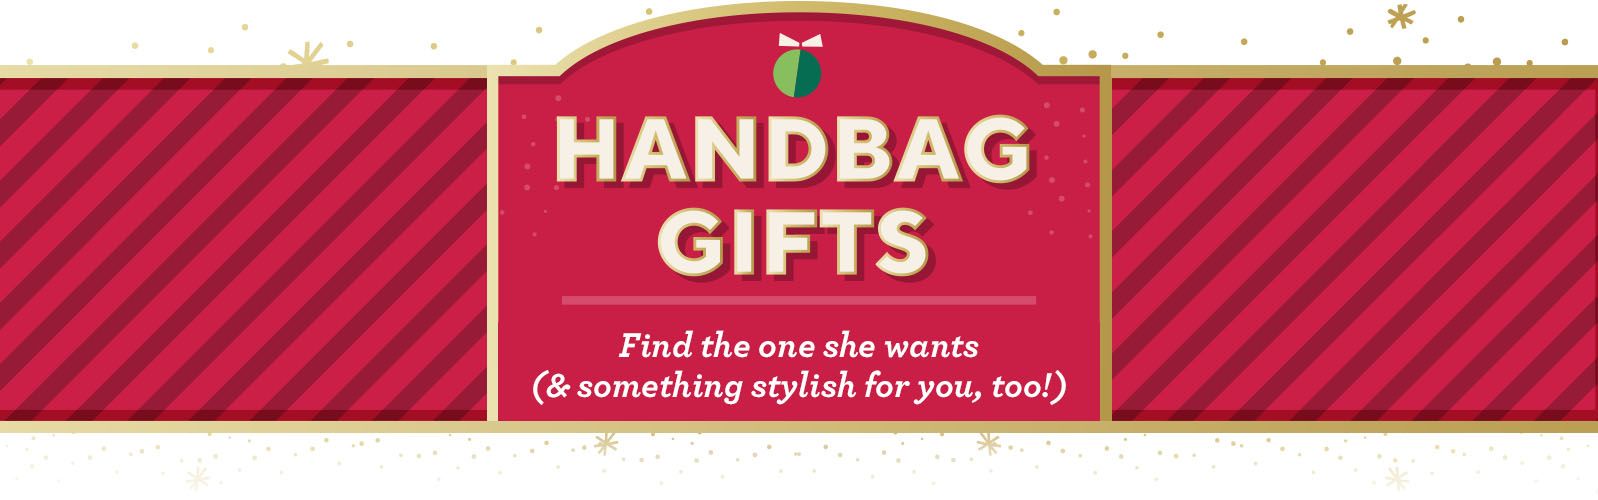 Handbag Gifts.  Find the one she wants (and something stylish for you, too!)